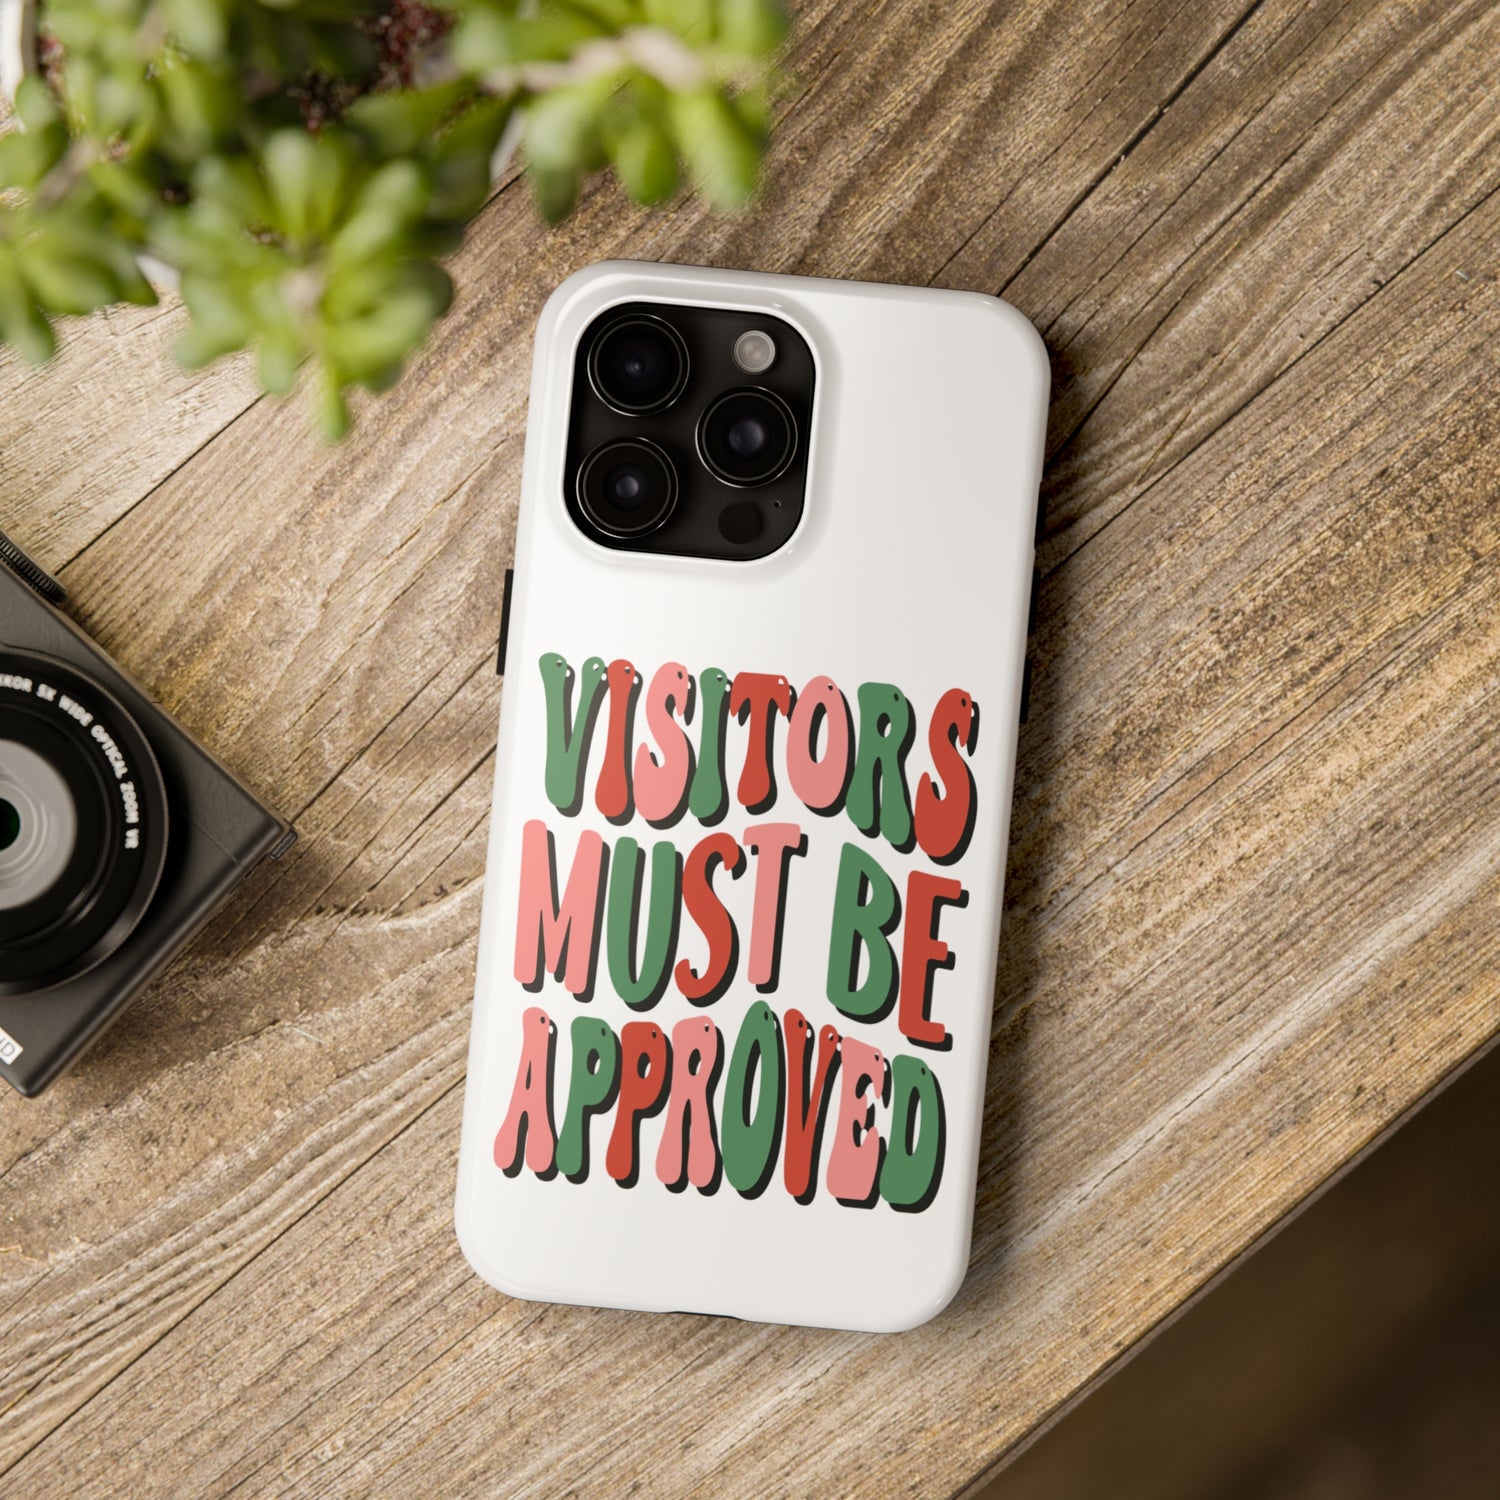 Vistors Must Be Approved iPhone "Tough Case" Design by TheGlassyLass.com